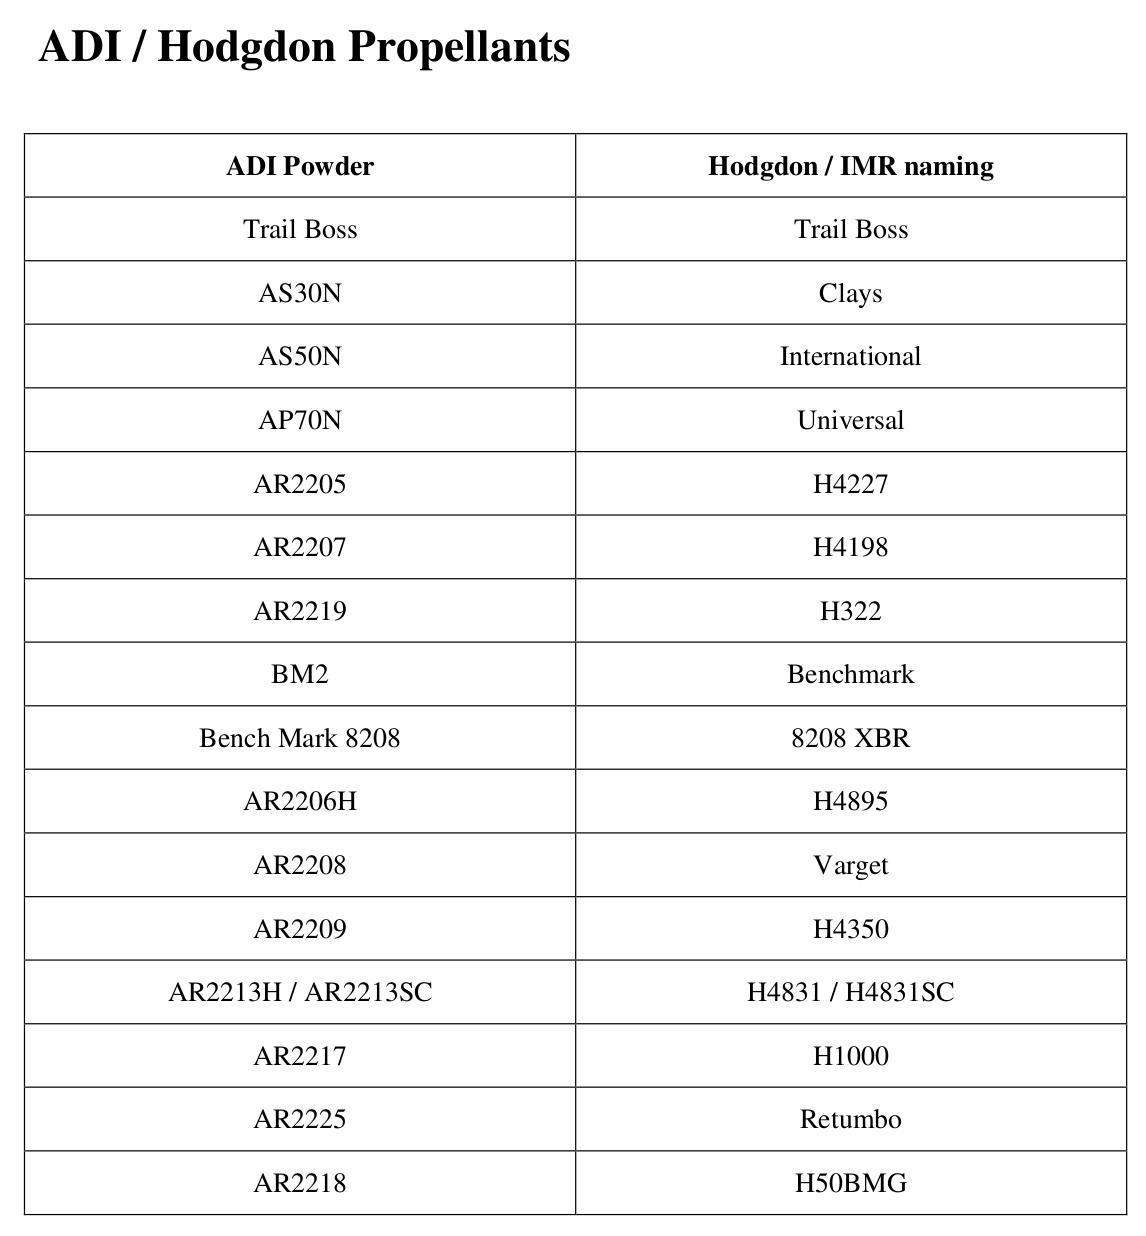 This table supplied by ADI shows the ADI powders made by them in Australia and the ADI product name used in Australia and New Zealand, and the Hodgdon label for these powders in the US. (Source ADI).